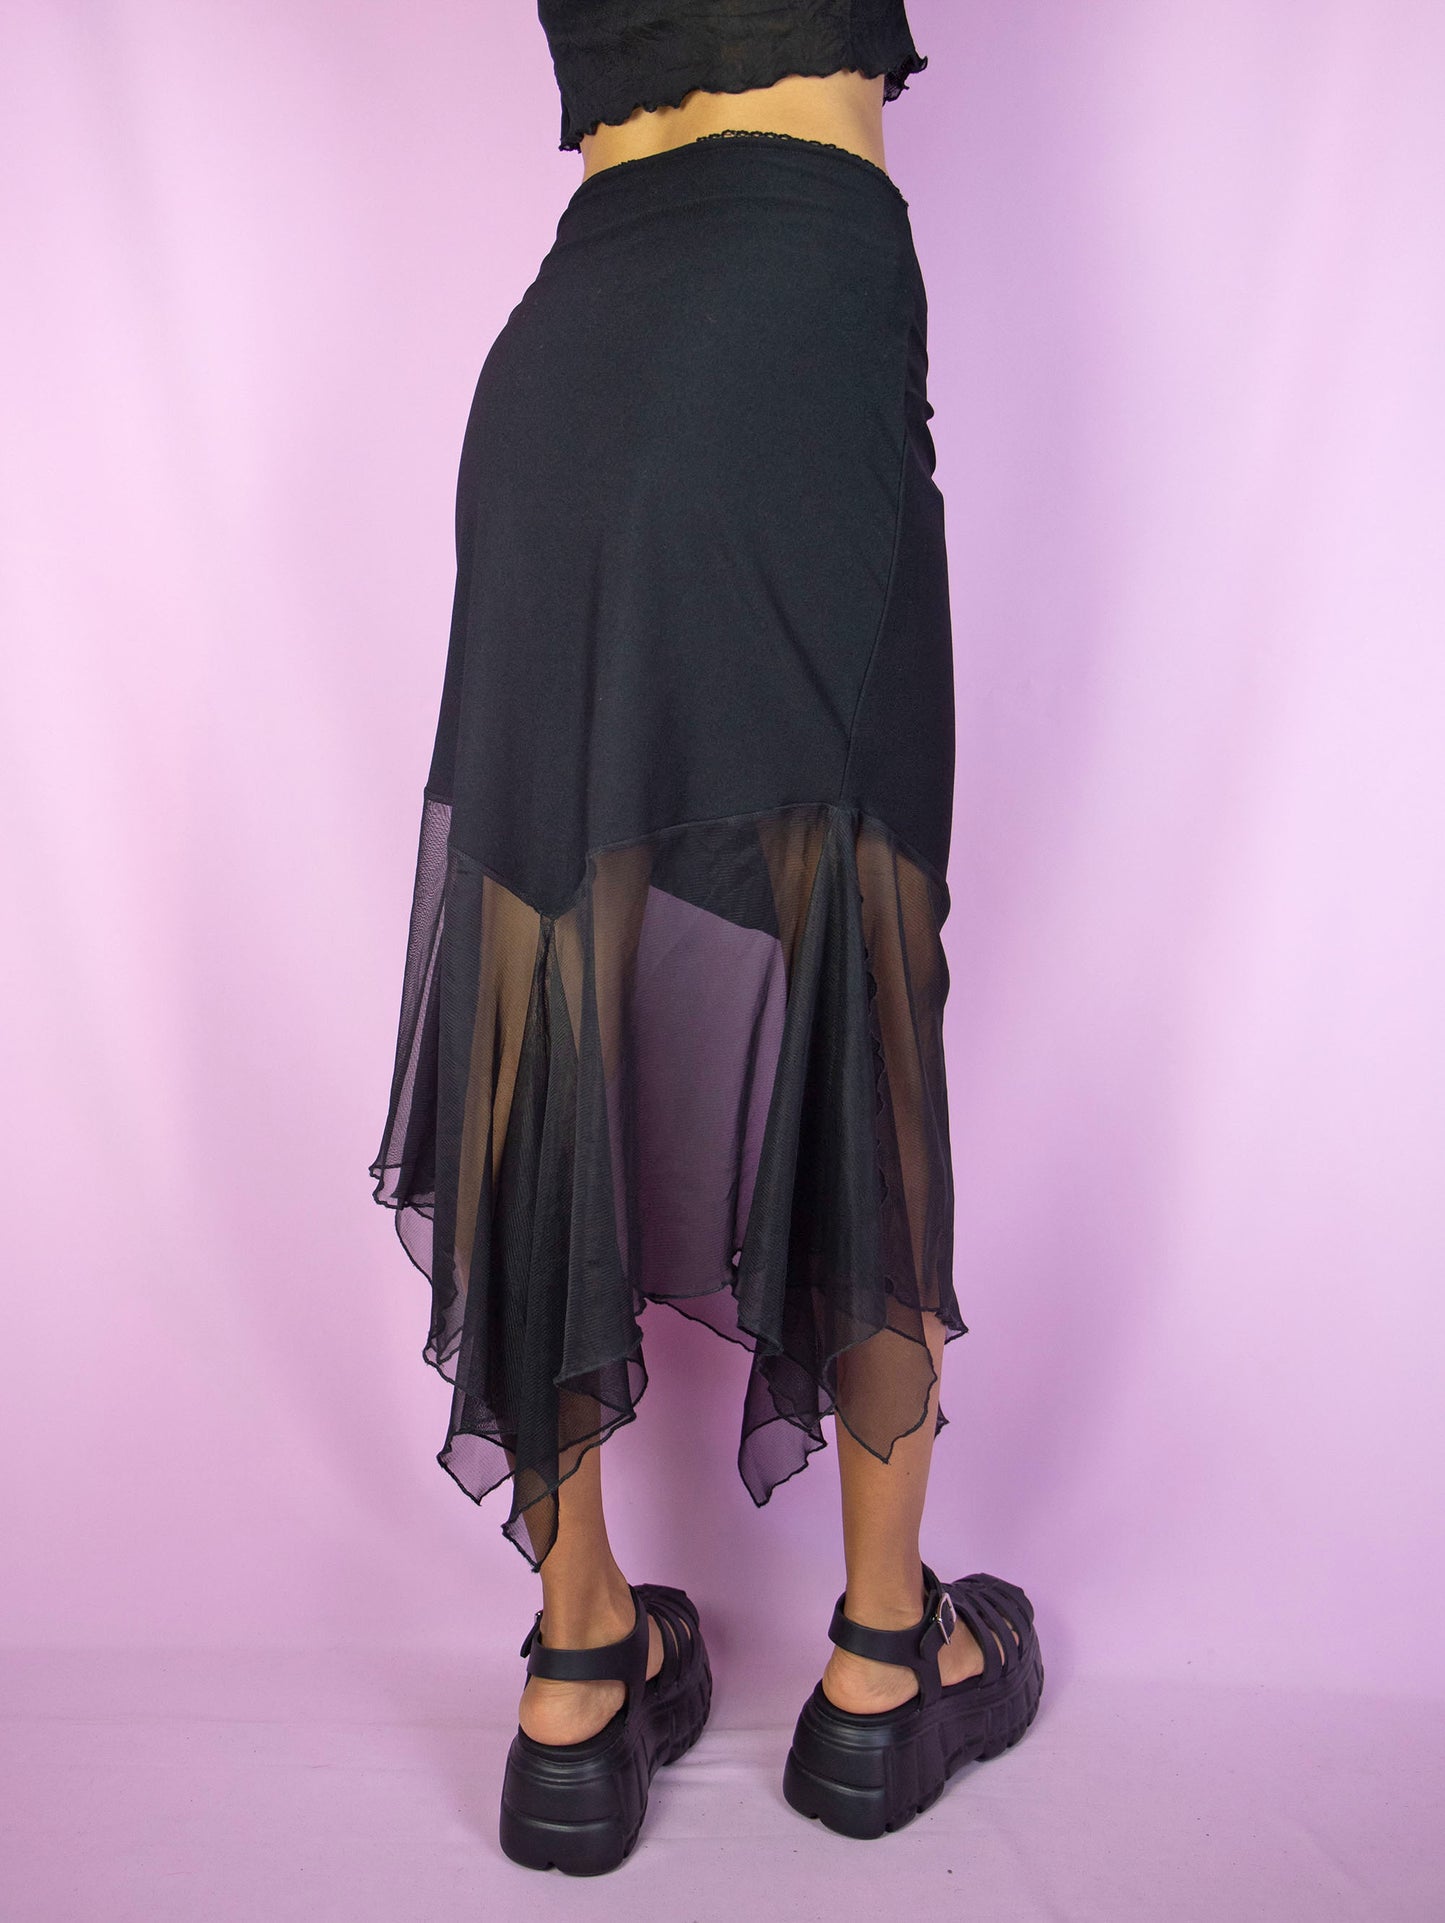 The Y2K Black Mesh Midi Skirt is a vintage 2000s fairy goth subversive party style skirt with a pointed asymmetrical semi-sheer hem and an elastic waist.